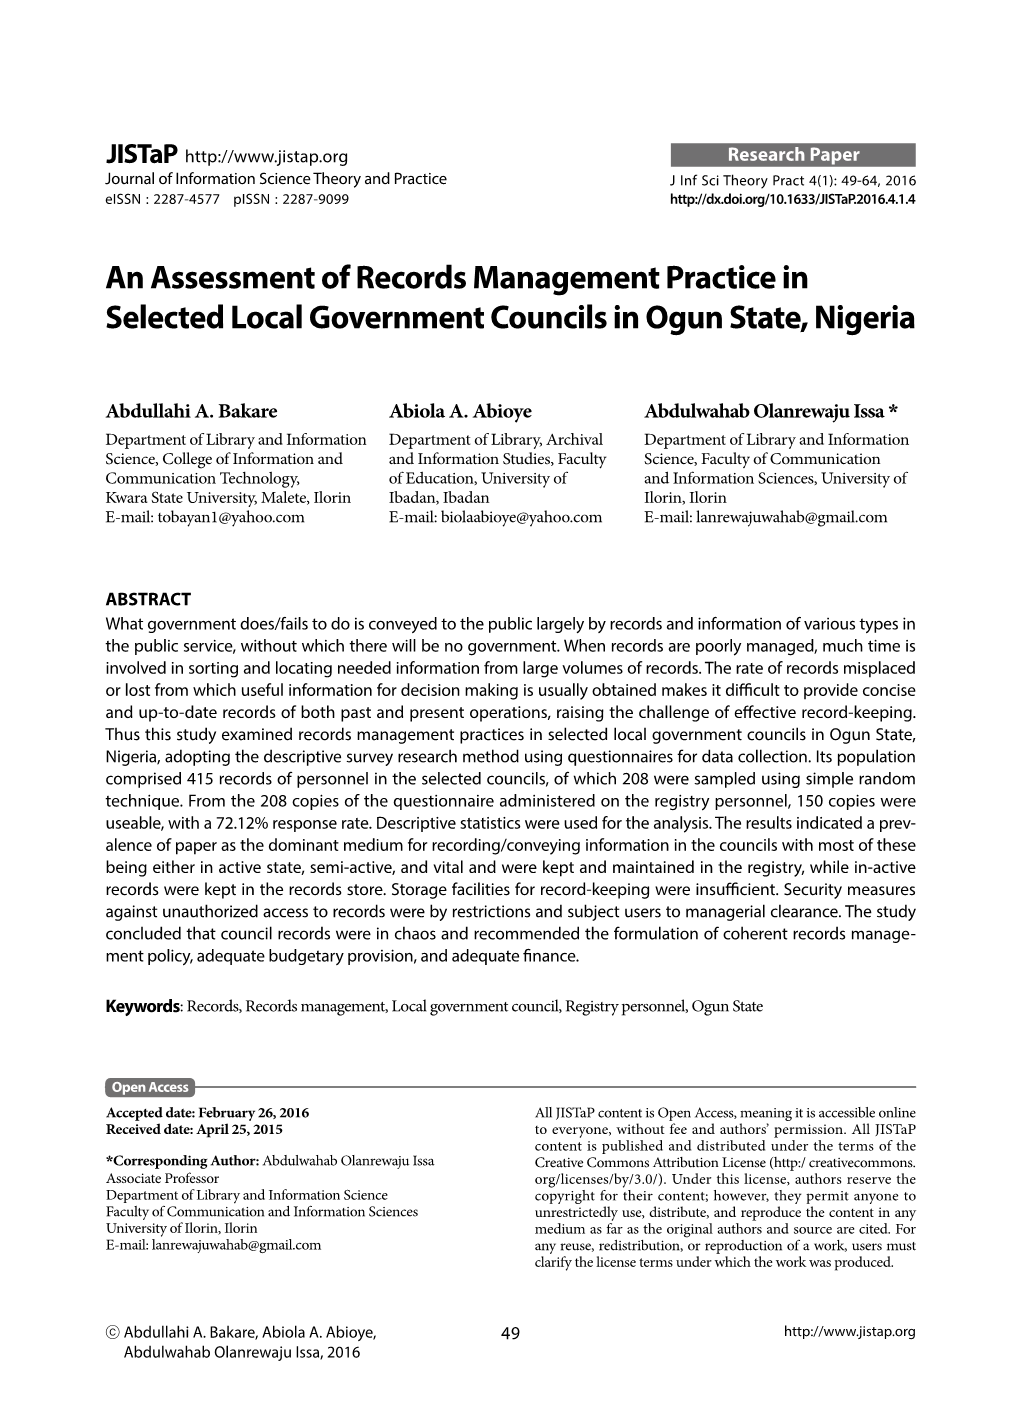 An Assessment of Records Management Practice in Selected Local Government Councils in Ogun State, Nigeria